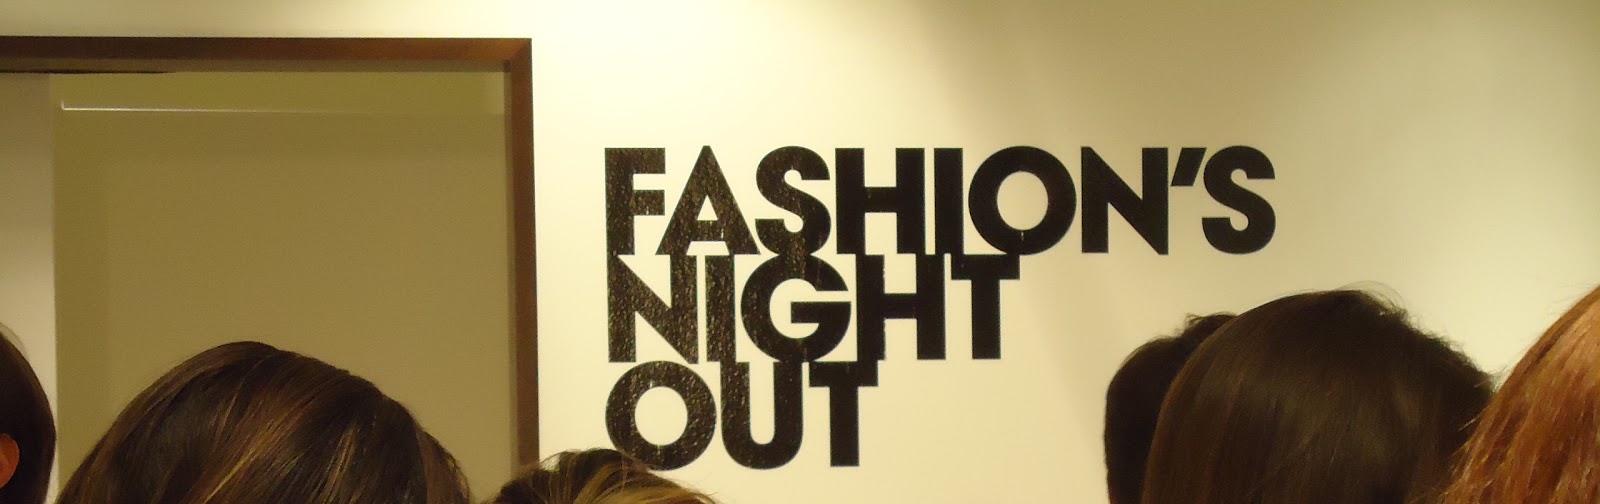 Fashion Night Out, Neiman Marcus